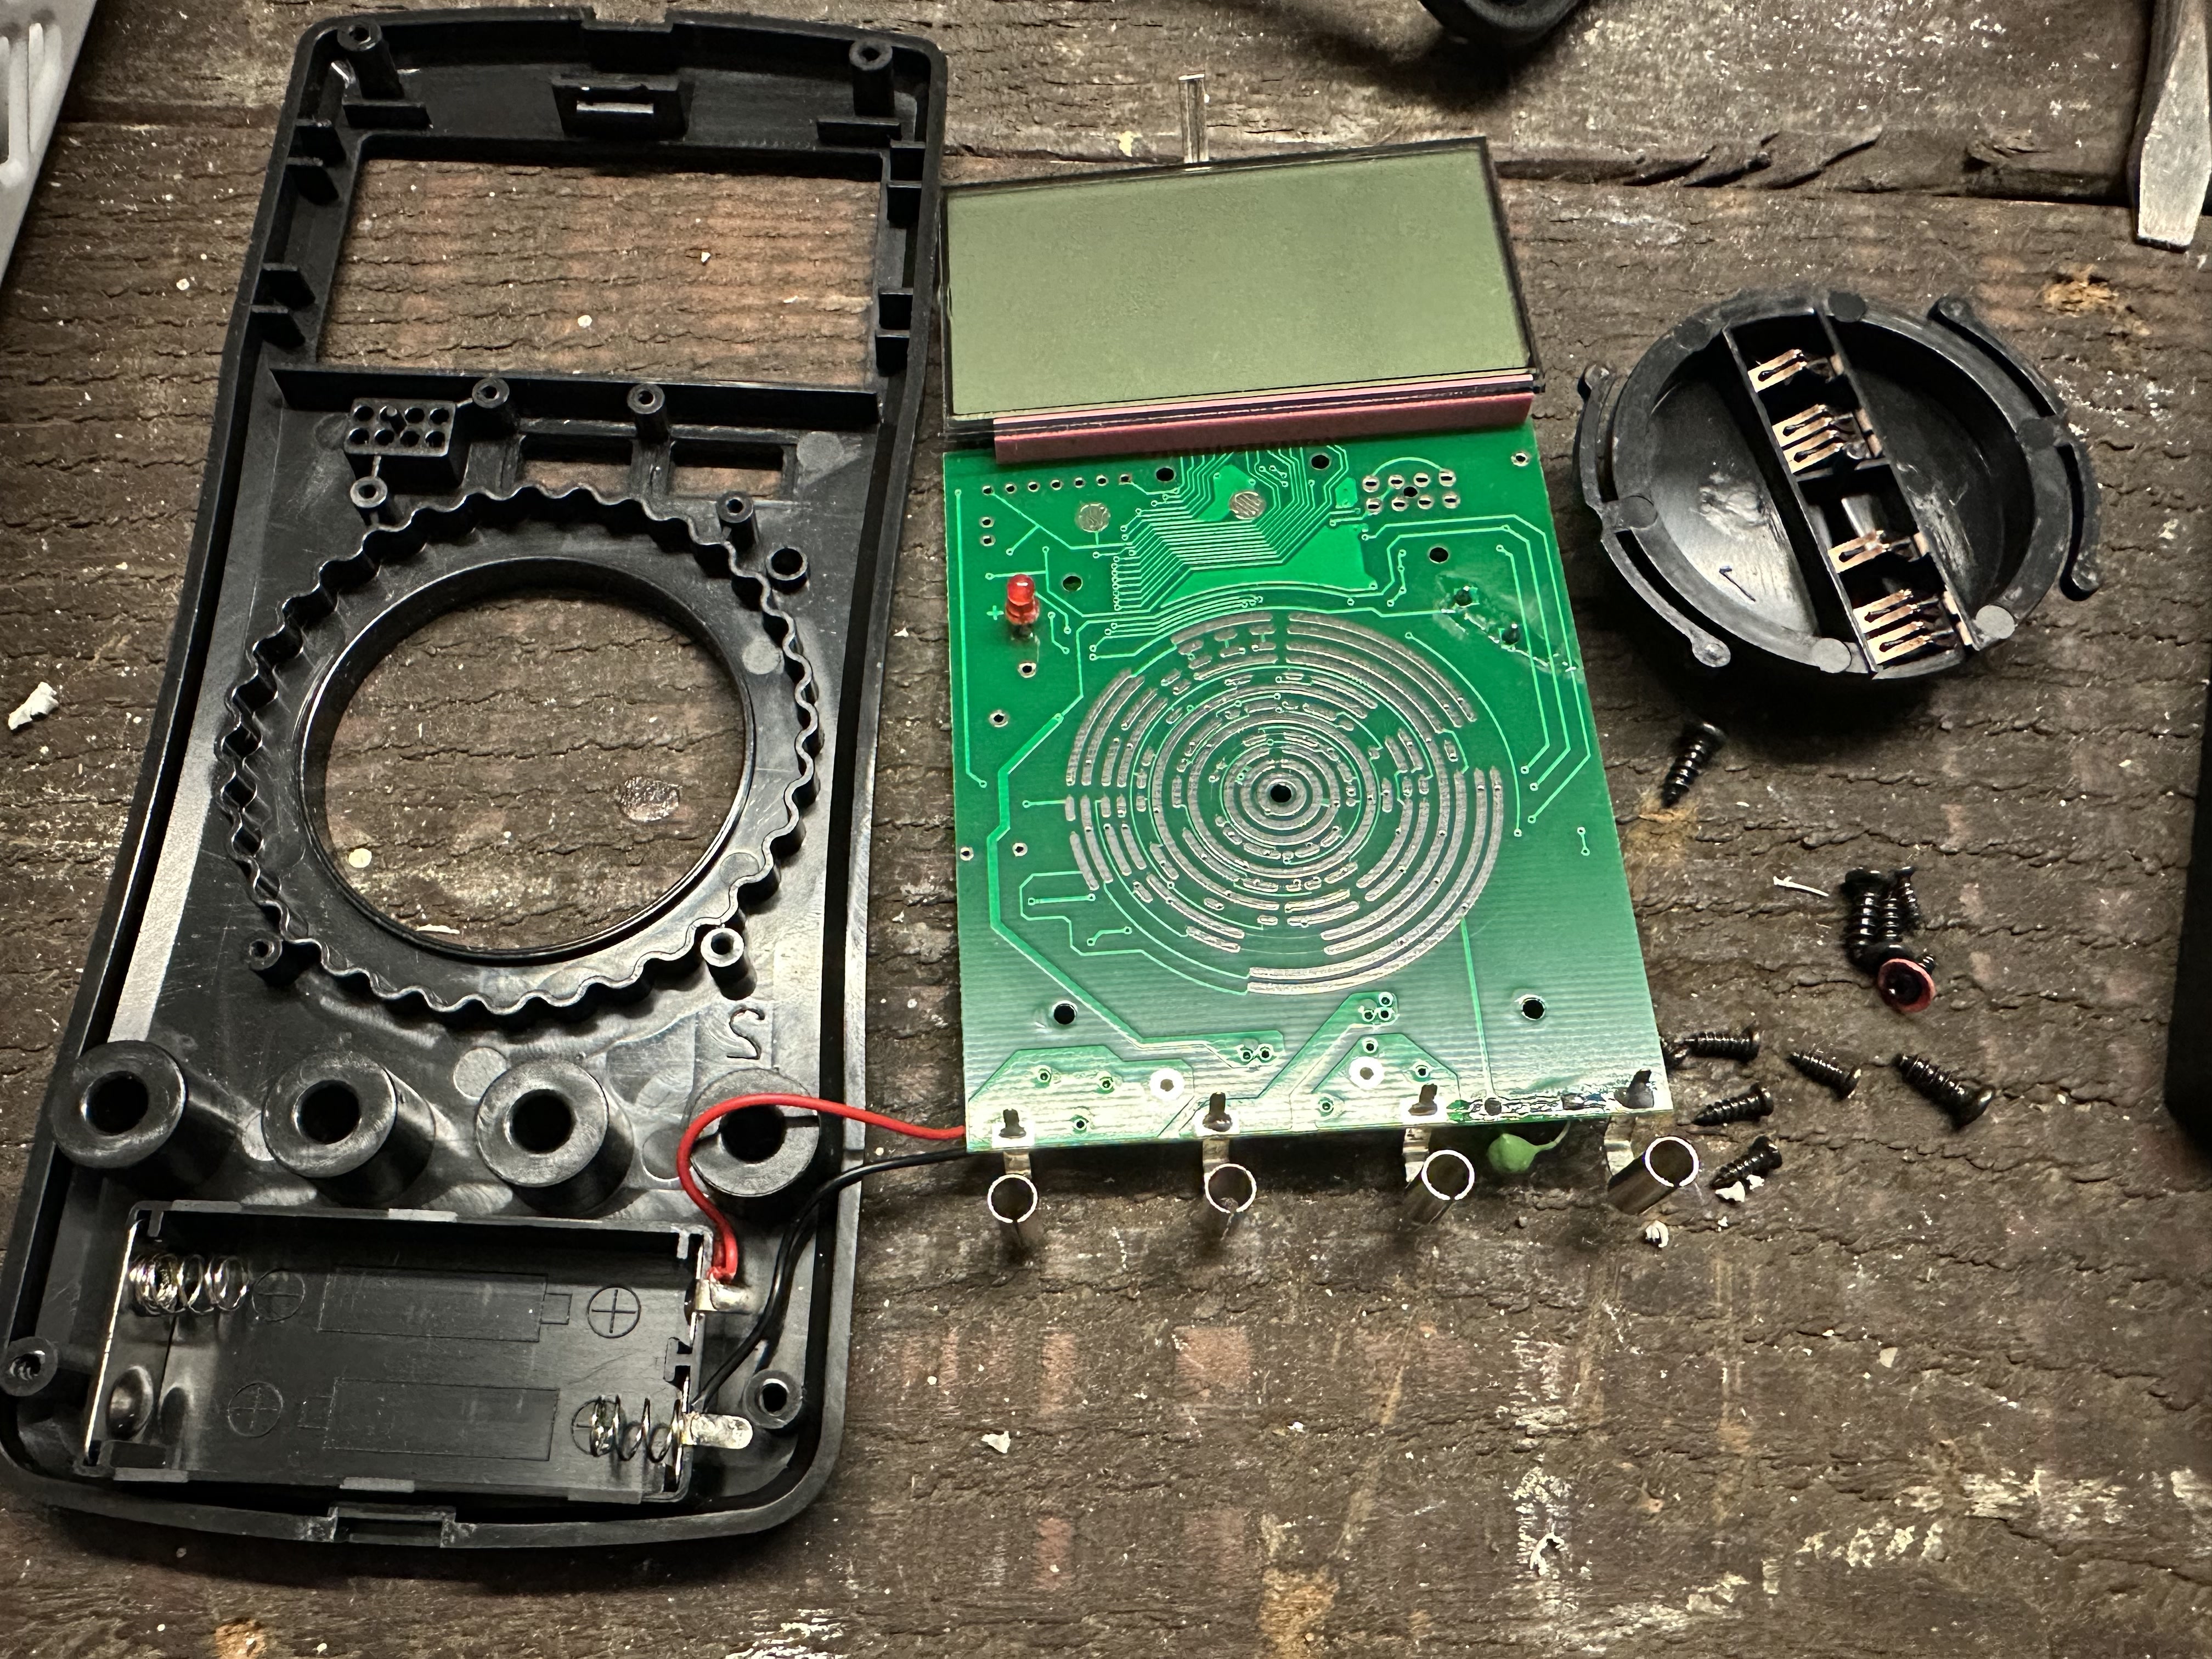 Disassembled ANENG-SZ08 multimeter showing the poorly designed rotary control mechanism